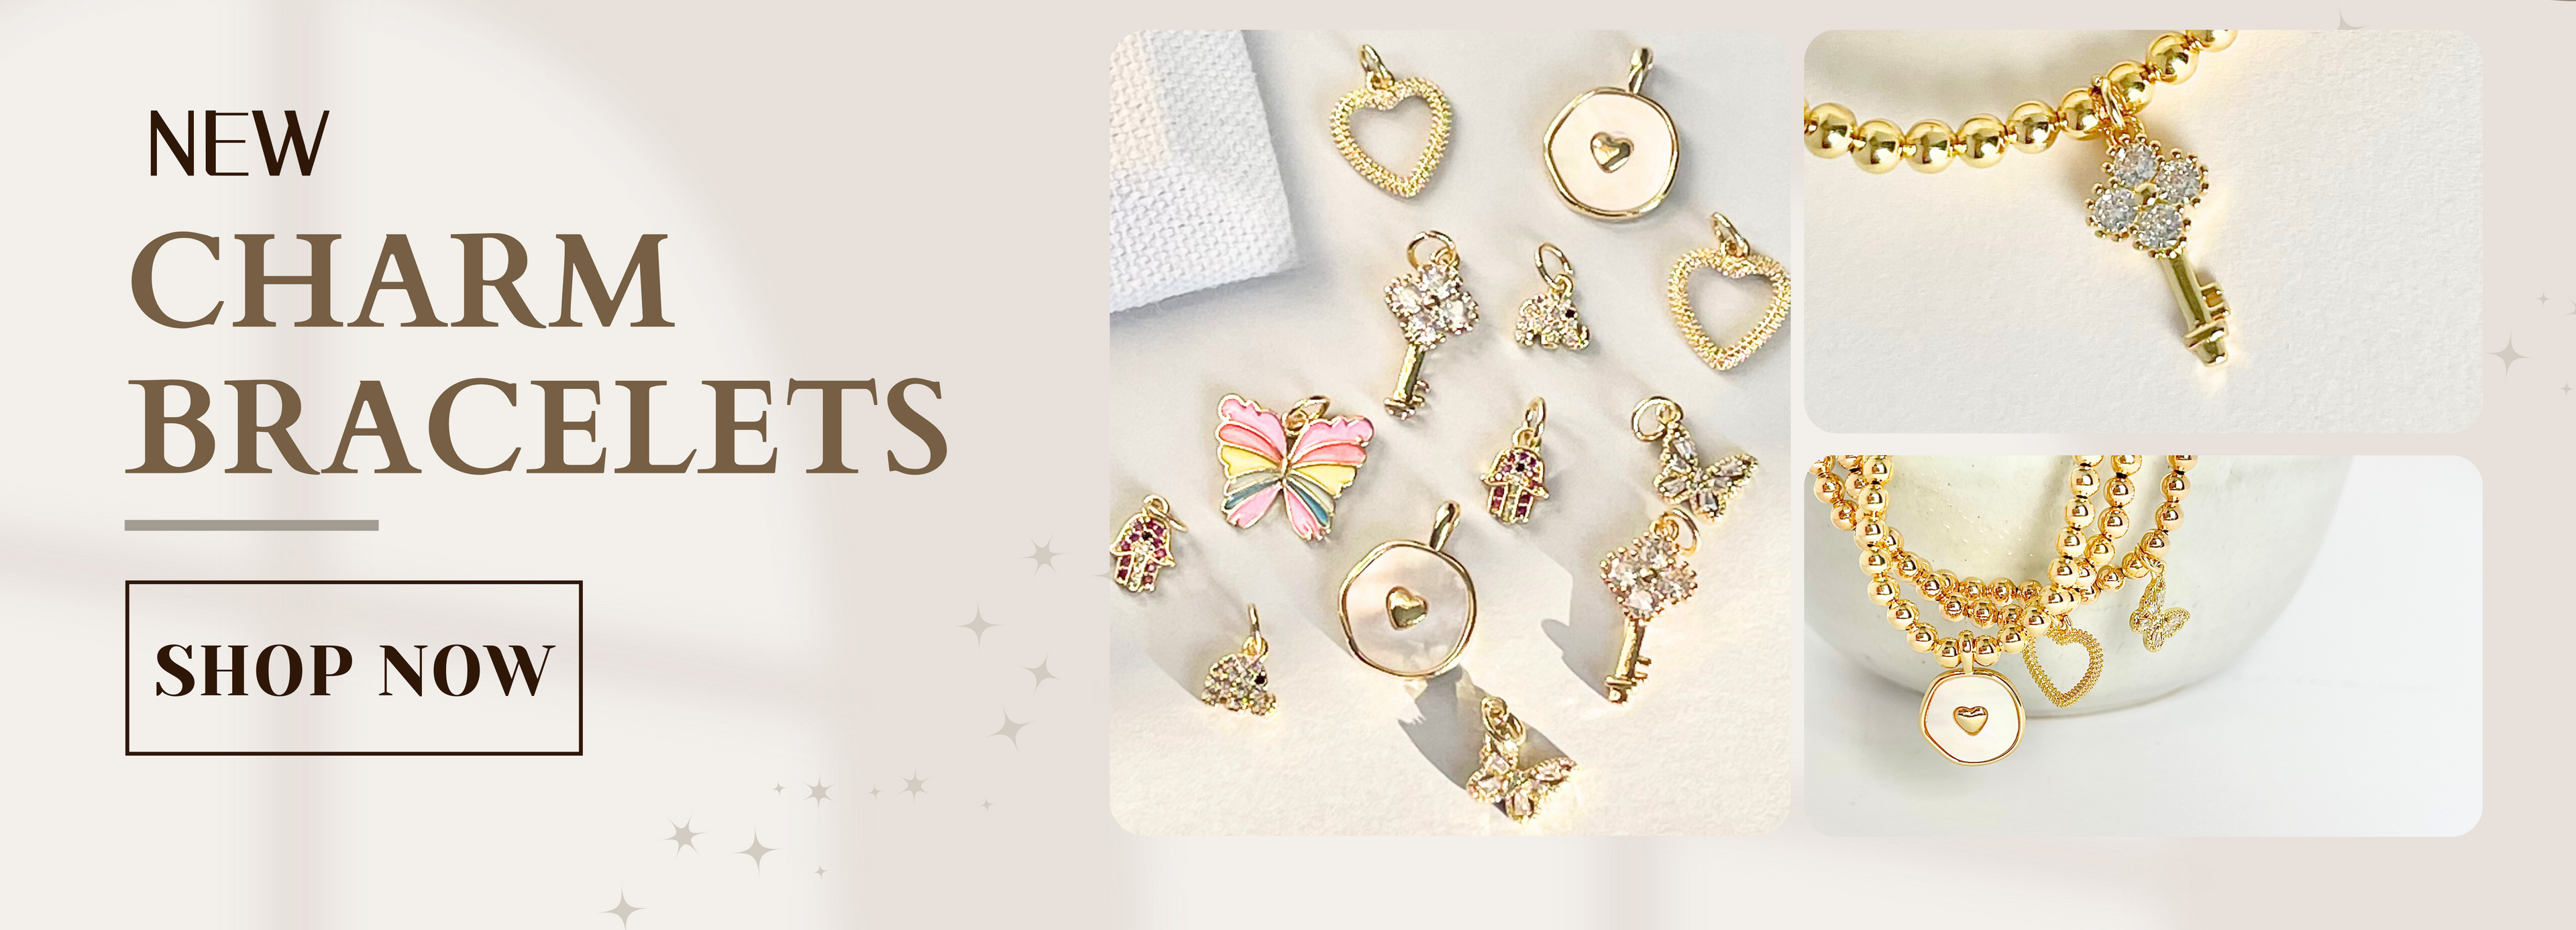 High quality gold-filled charms that are trendy and affordable.